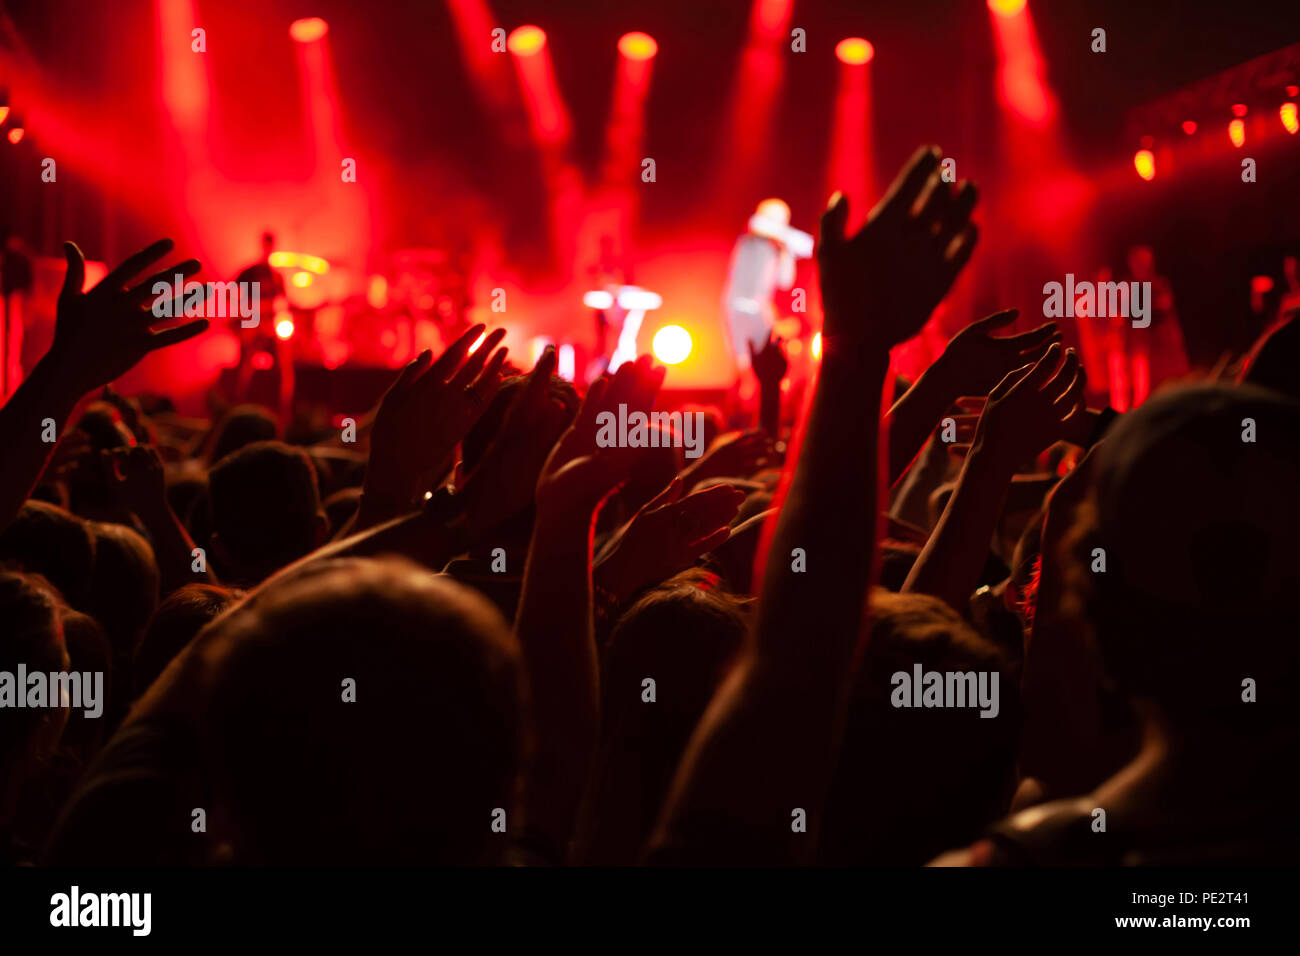 concert crowd during festival, hands of many people cheering musicians playing music on stage, red back light Stock Photo